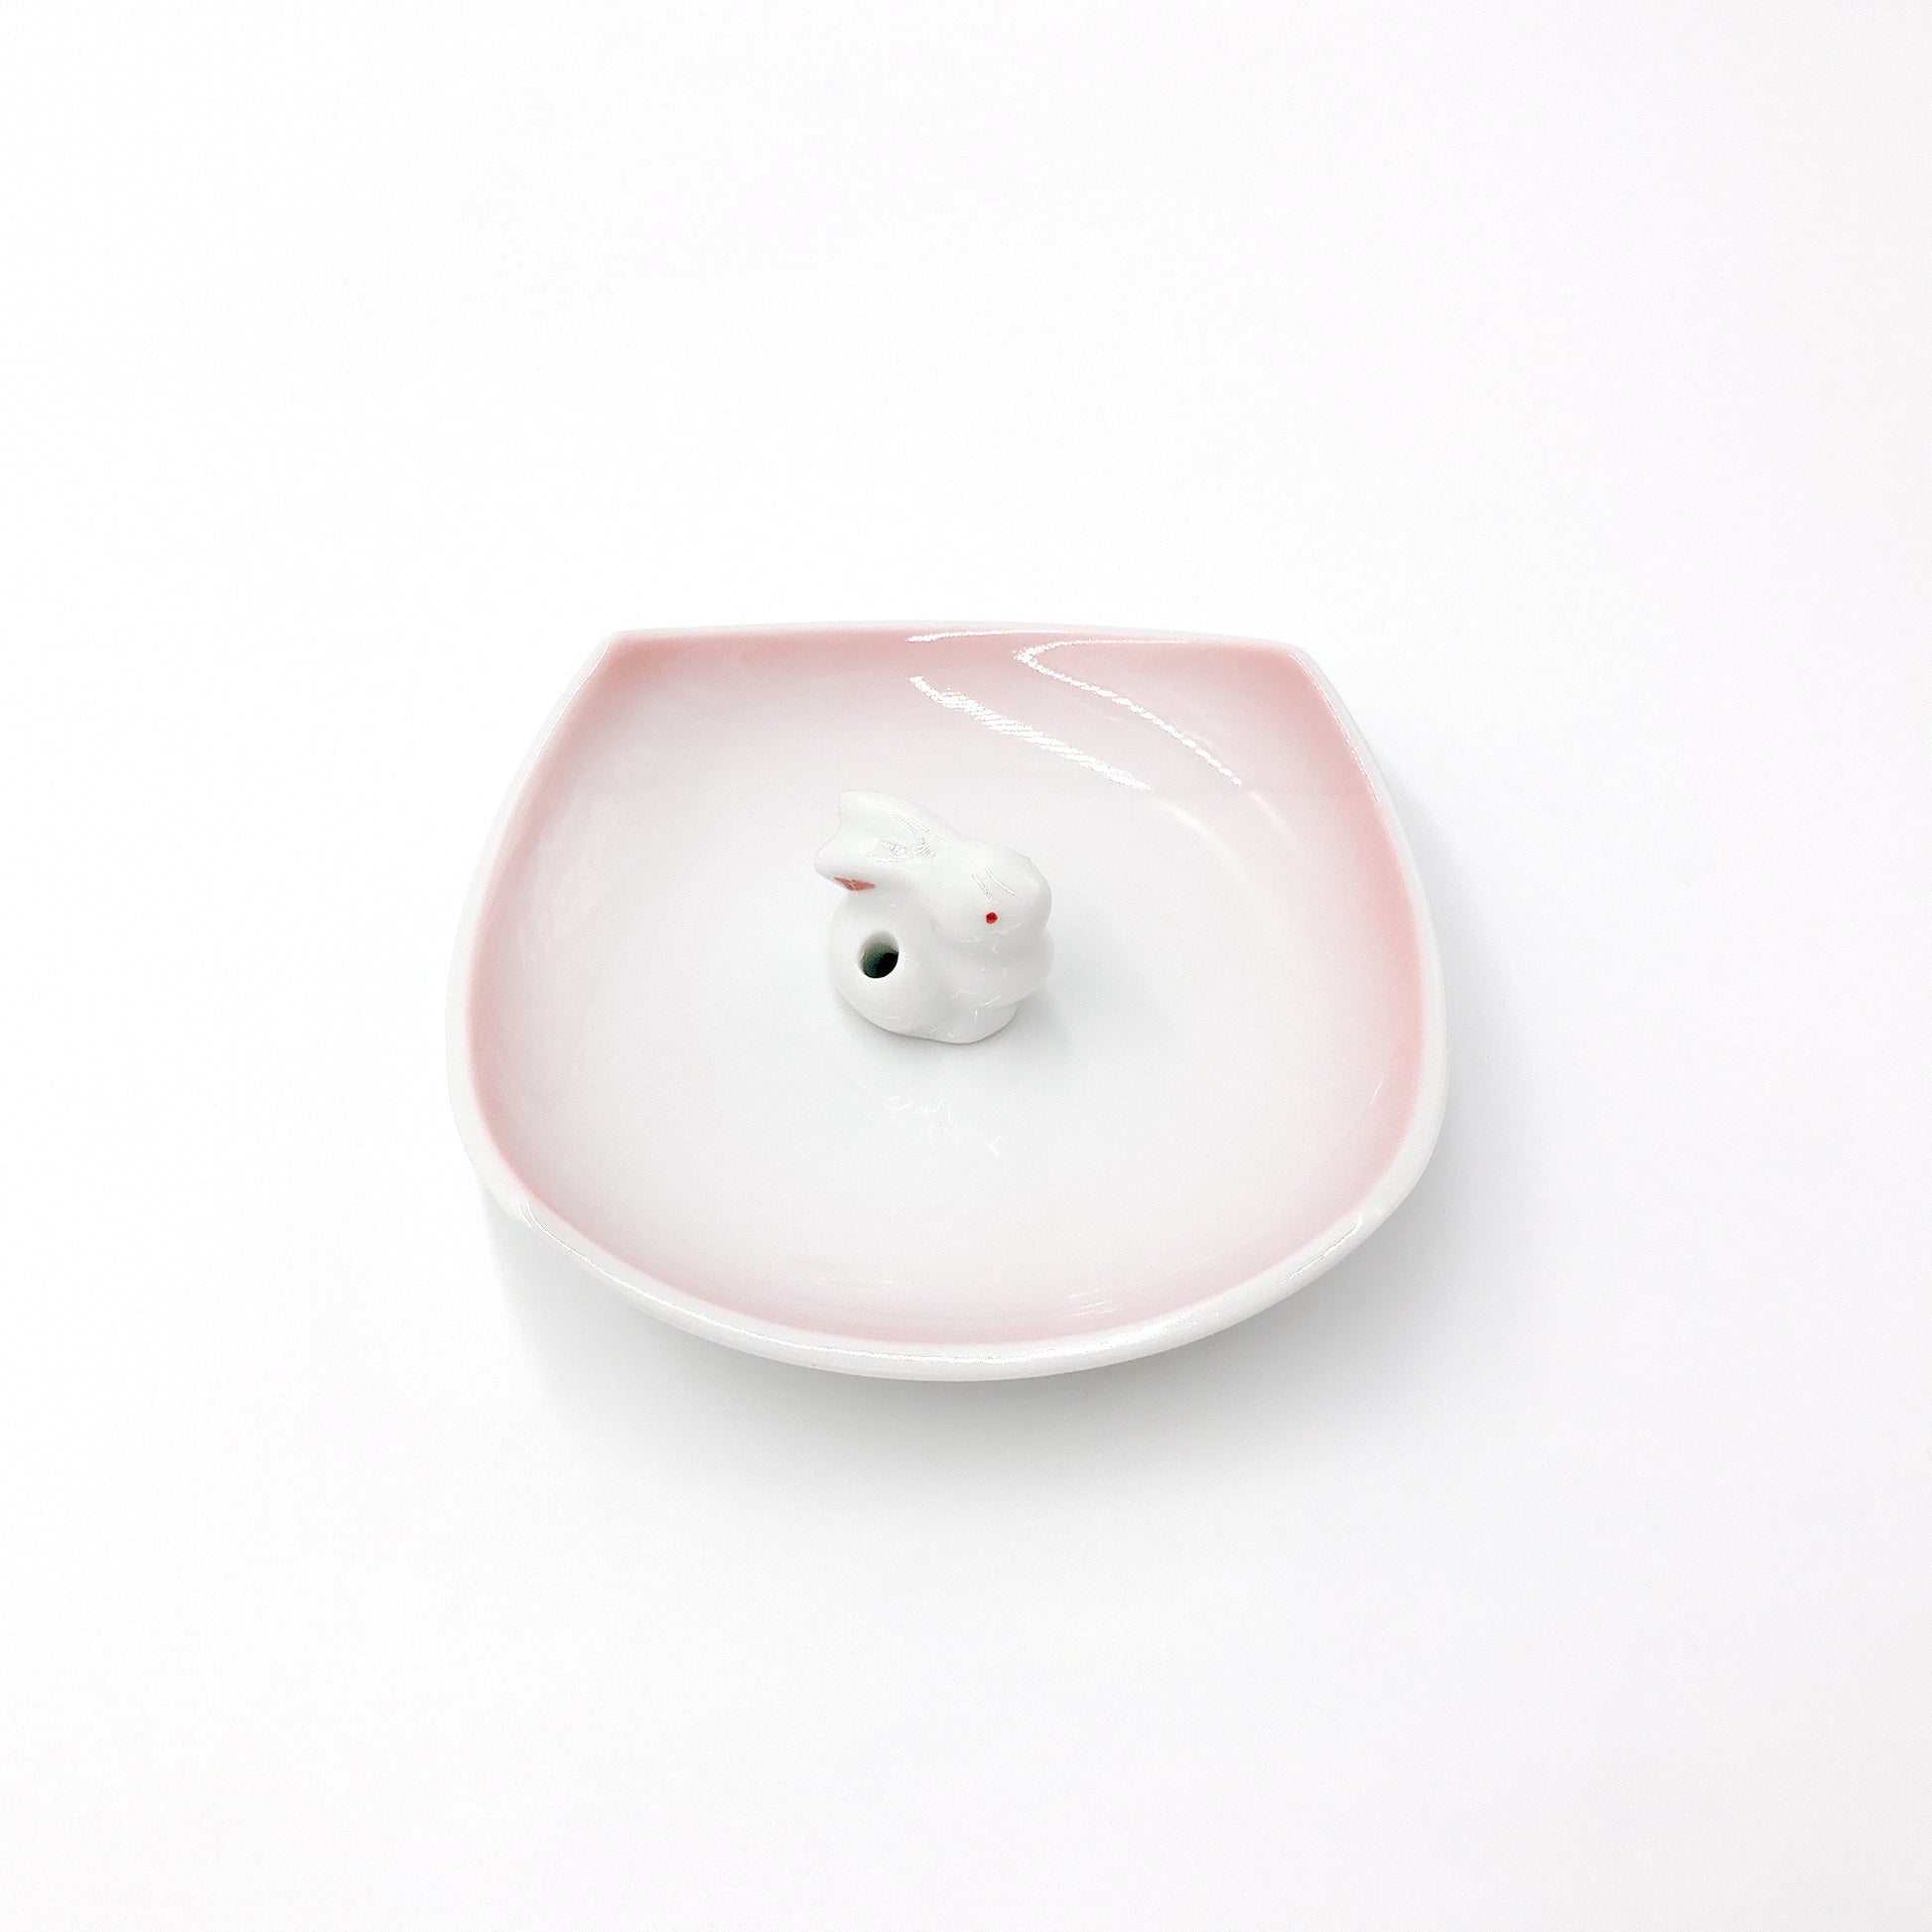 angled view of pink and white ceramic Kyūkyodō Incense Set showing square incense plate and bunny incense stick holder